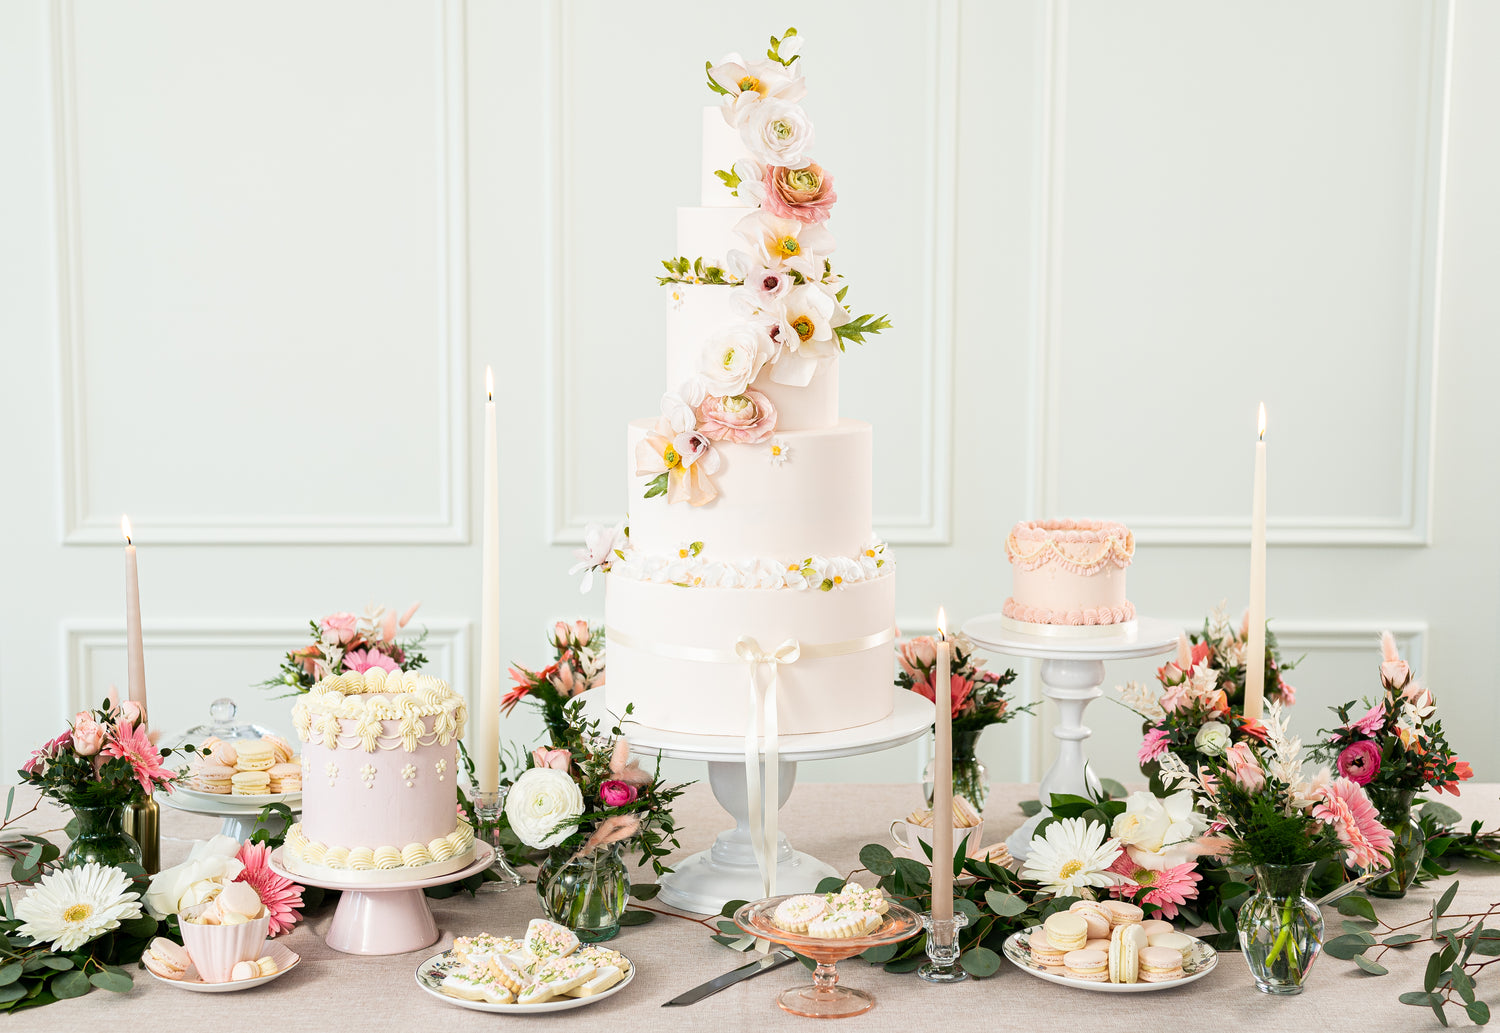 Table featuring cakes cookies and macarons in pink and peach garden floral theme with greenery